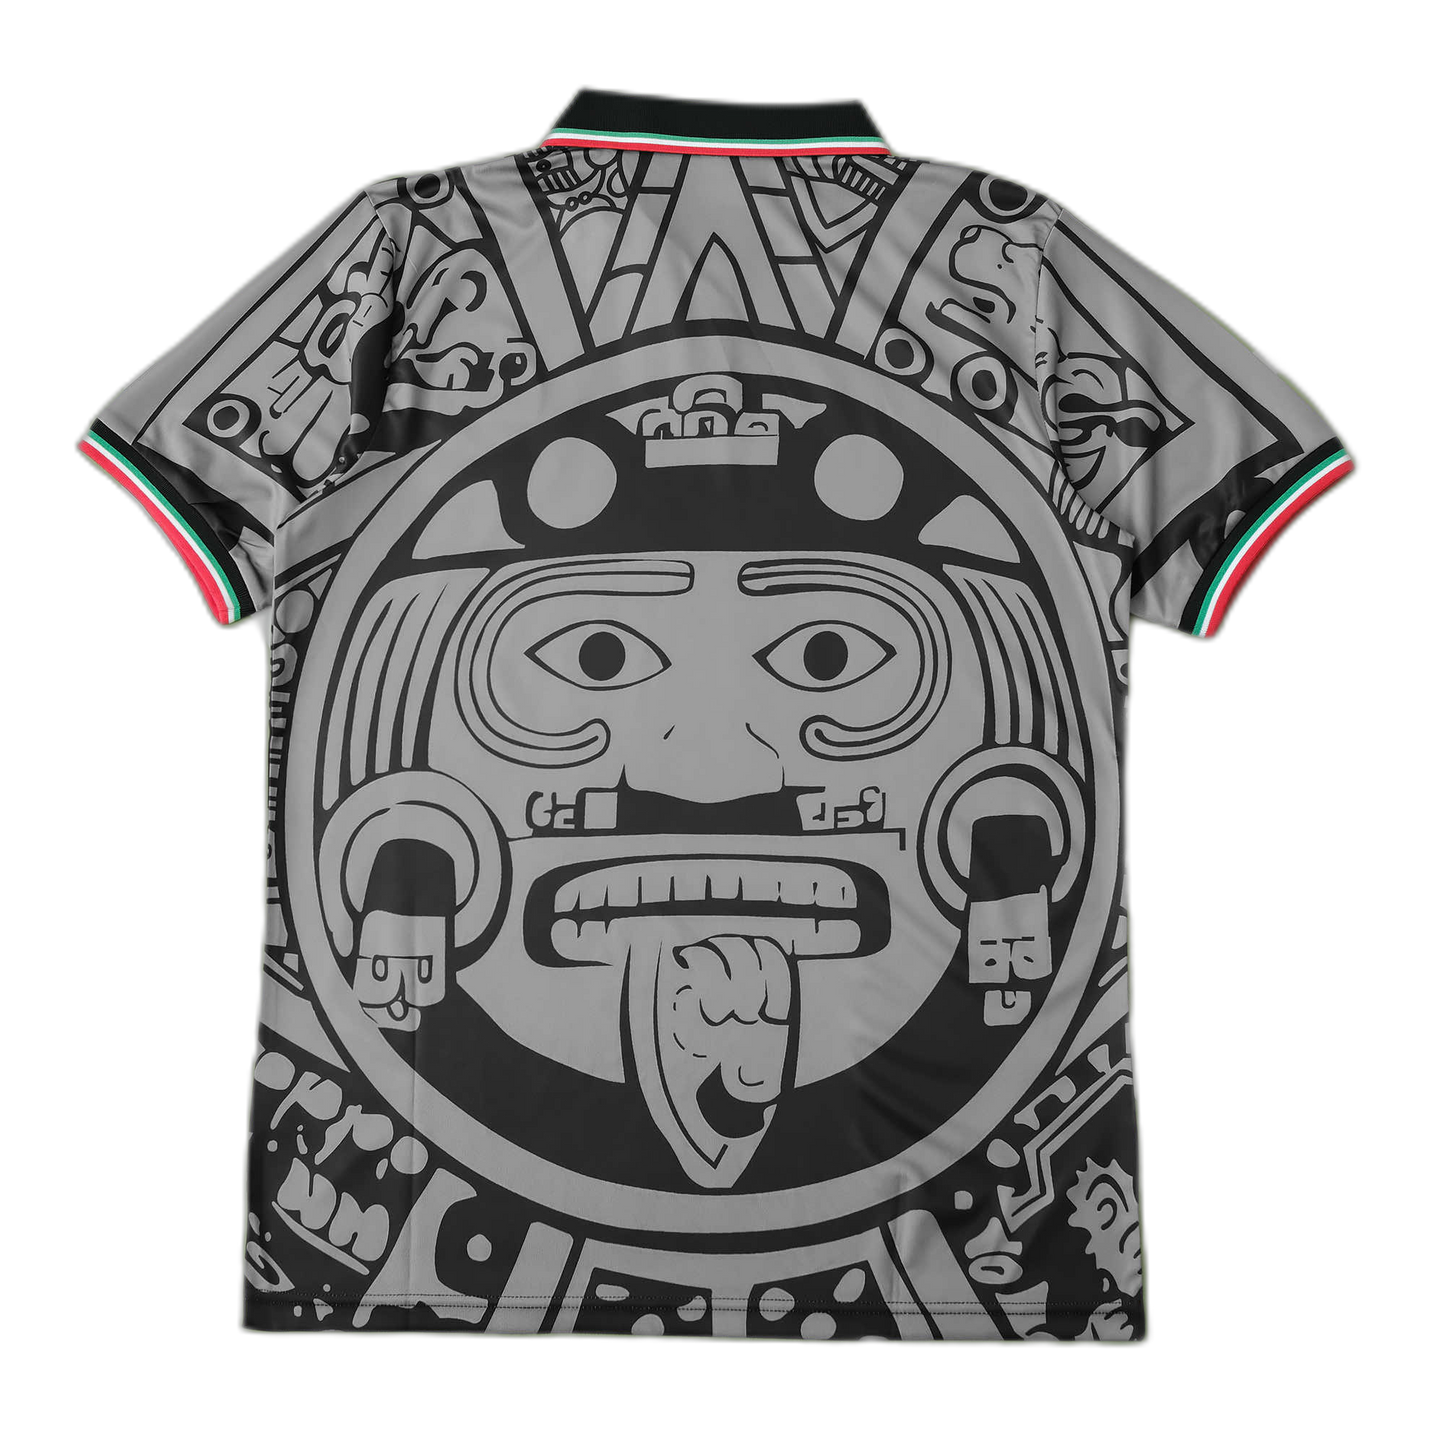 Mexico 1998 Away "World Cup" Jersey